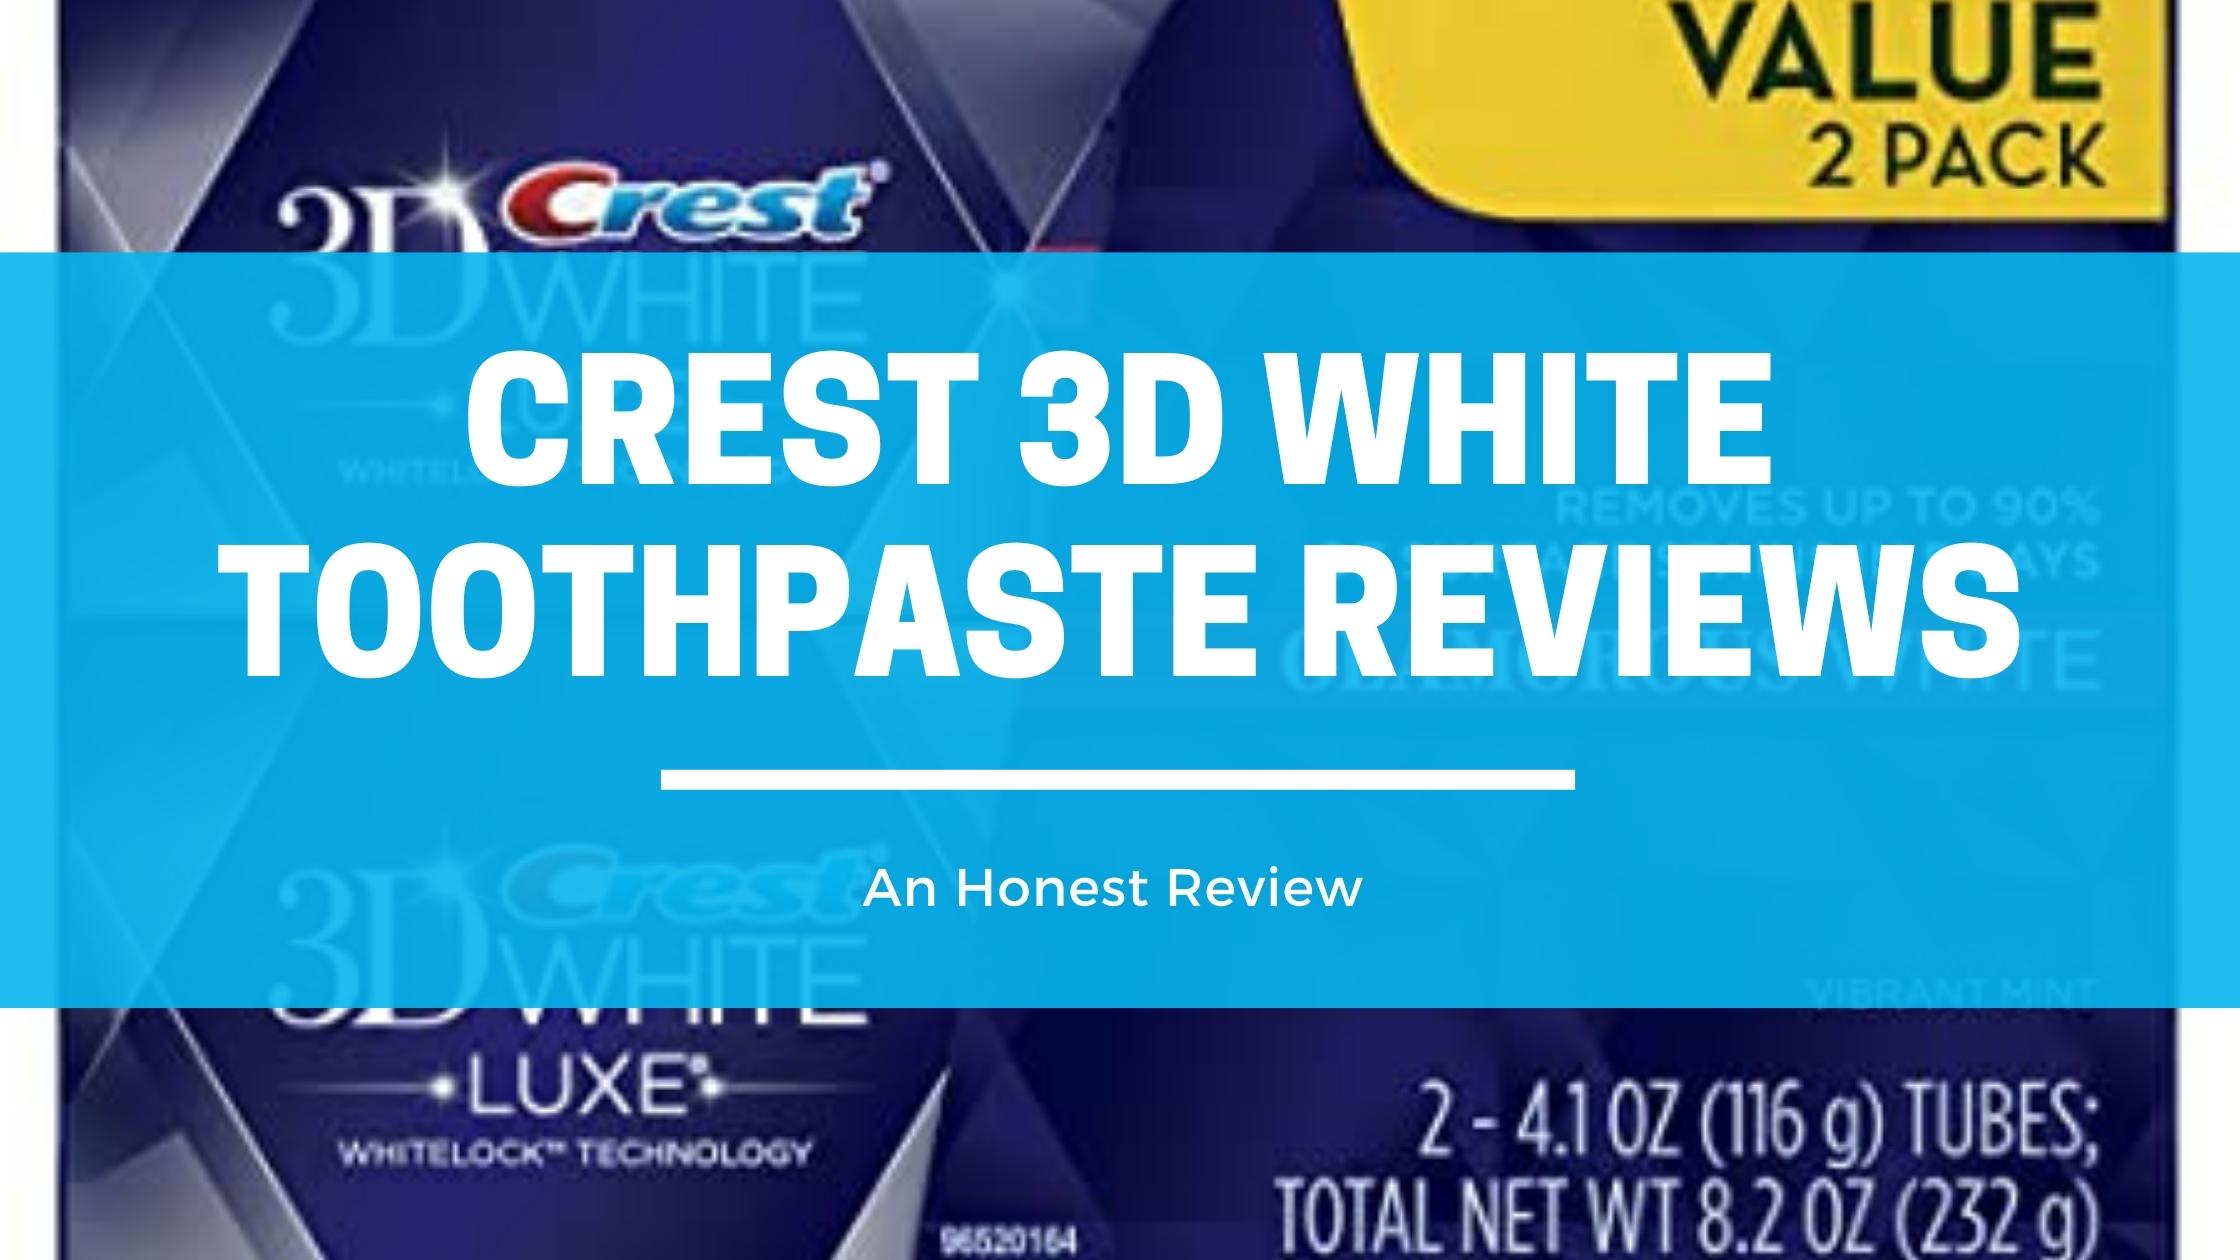 Crest 3d White Toothpaste Reviews